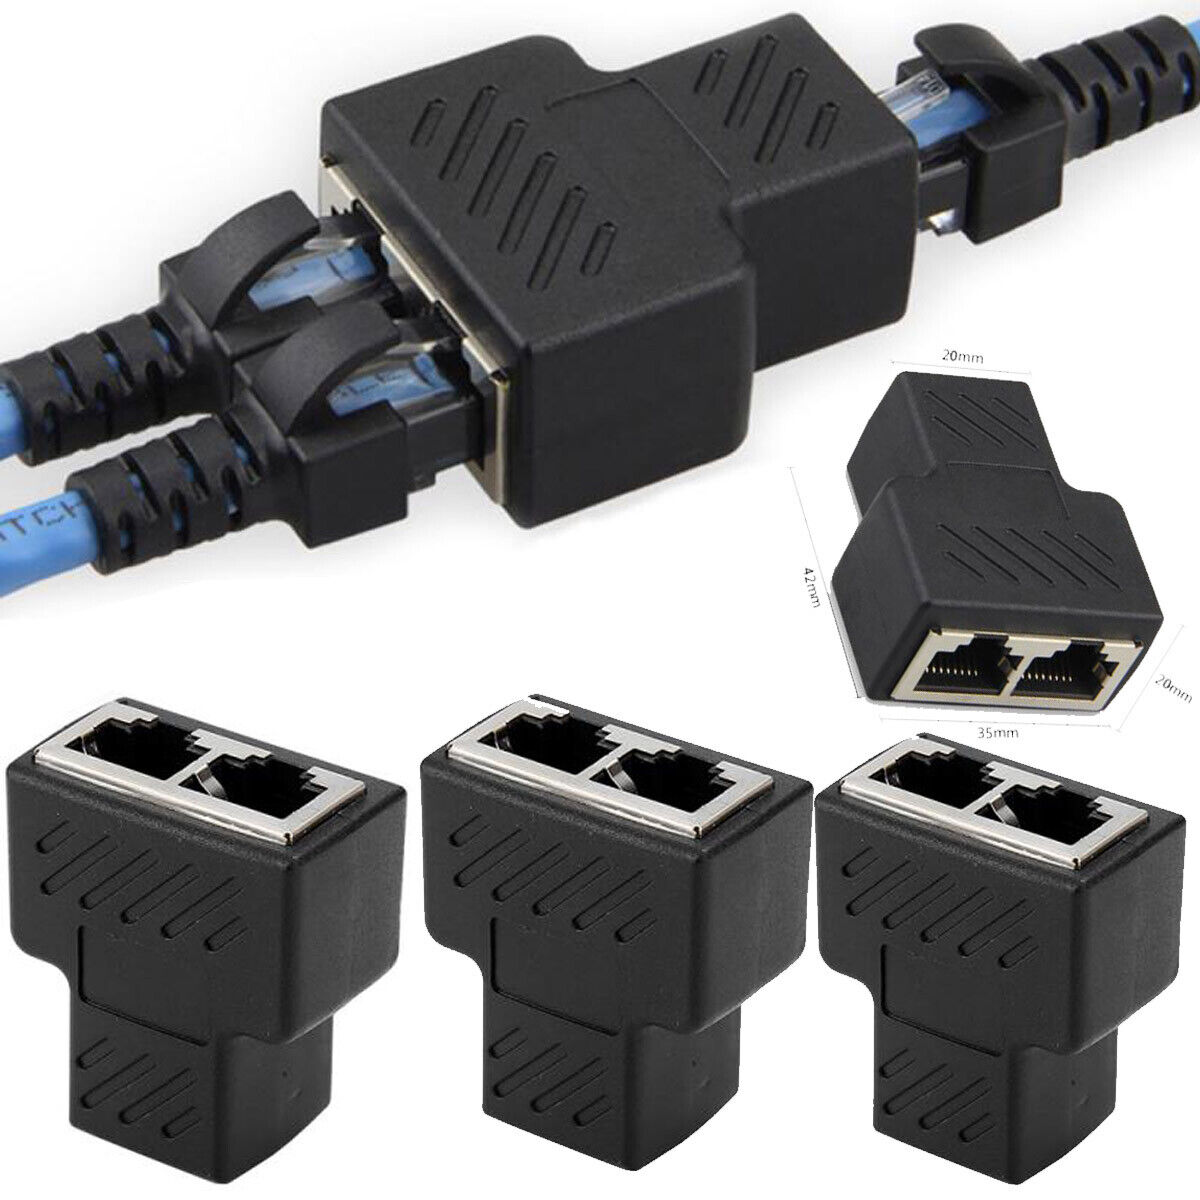 RJ45 Splitter Adapter 1 to 2 Ways CAT Ranking TOP19 C 6 LAN 5 7 Ethernet New York Mall Cable